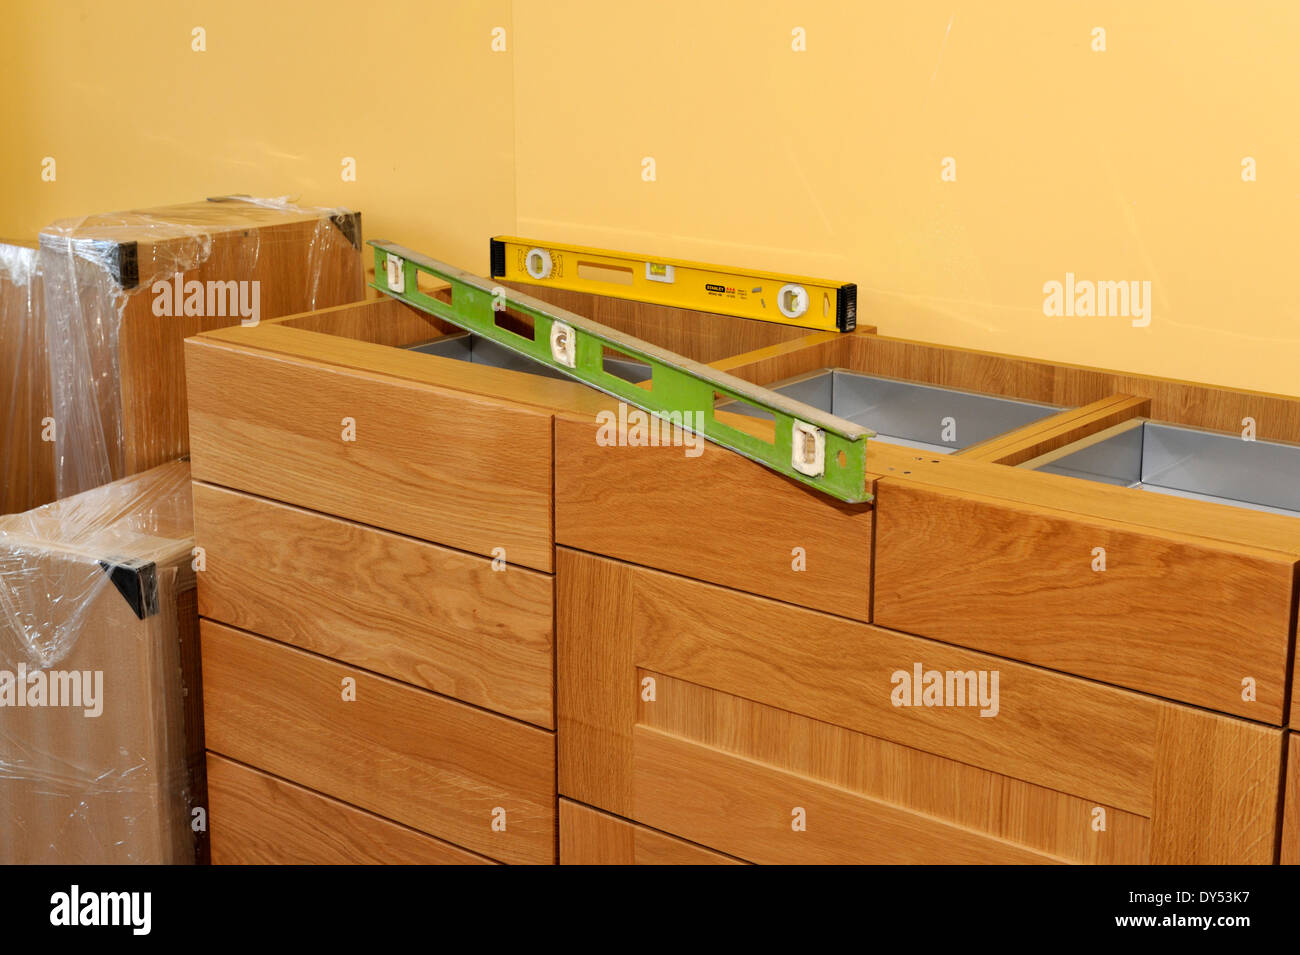 Building a kitchen from ready made units. Levelling units during installation so they line up. Stock Photo